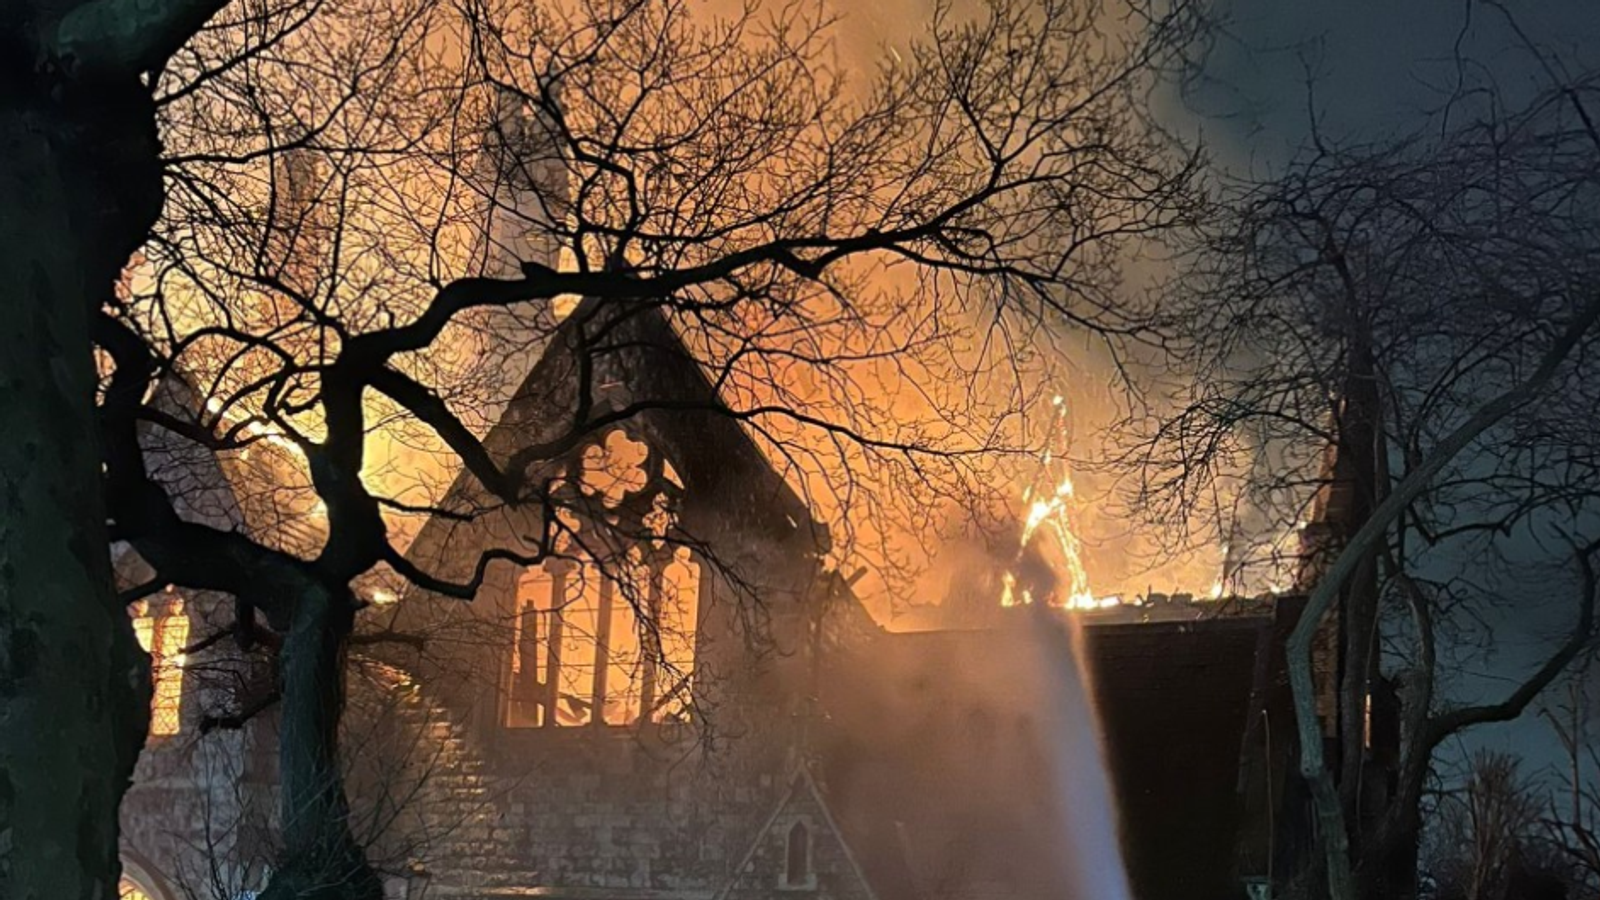 Fire destroys heritage-listed church in London | UK News